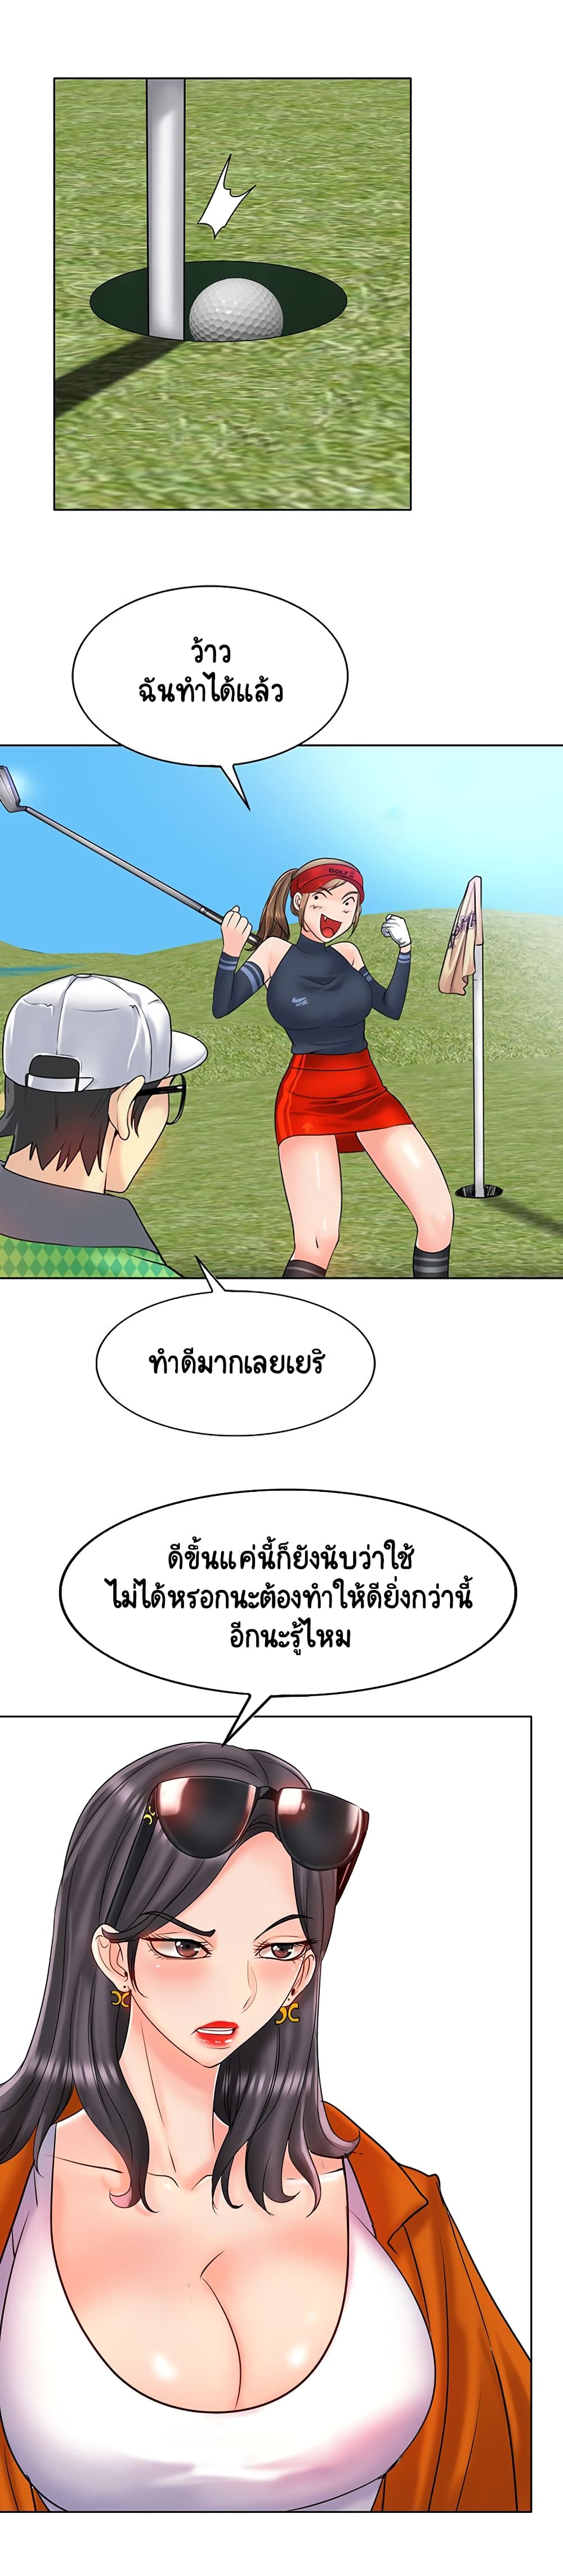 Hole In One21 (7)